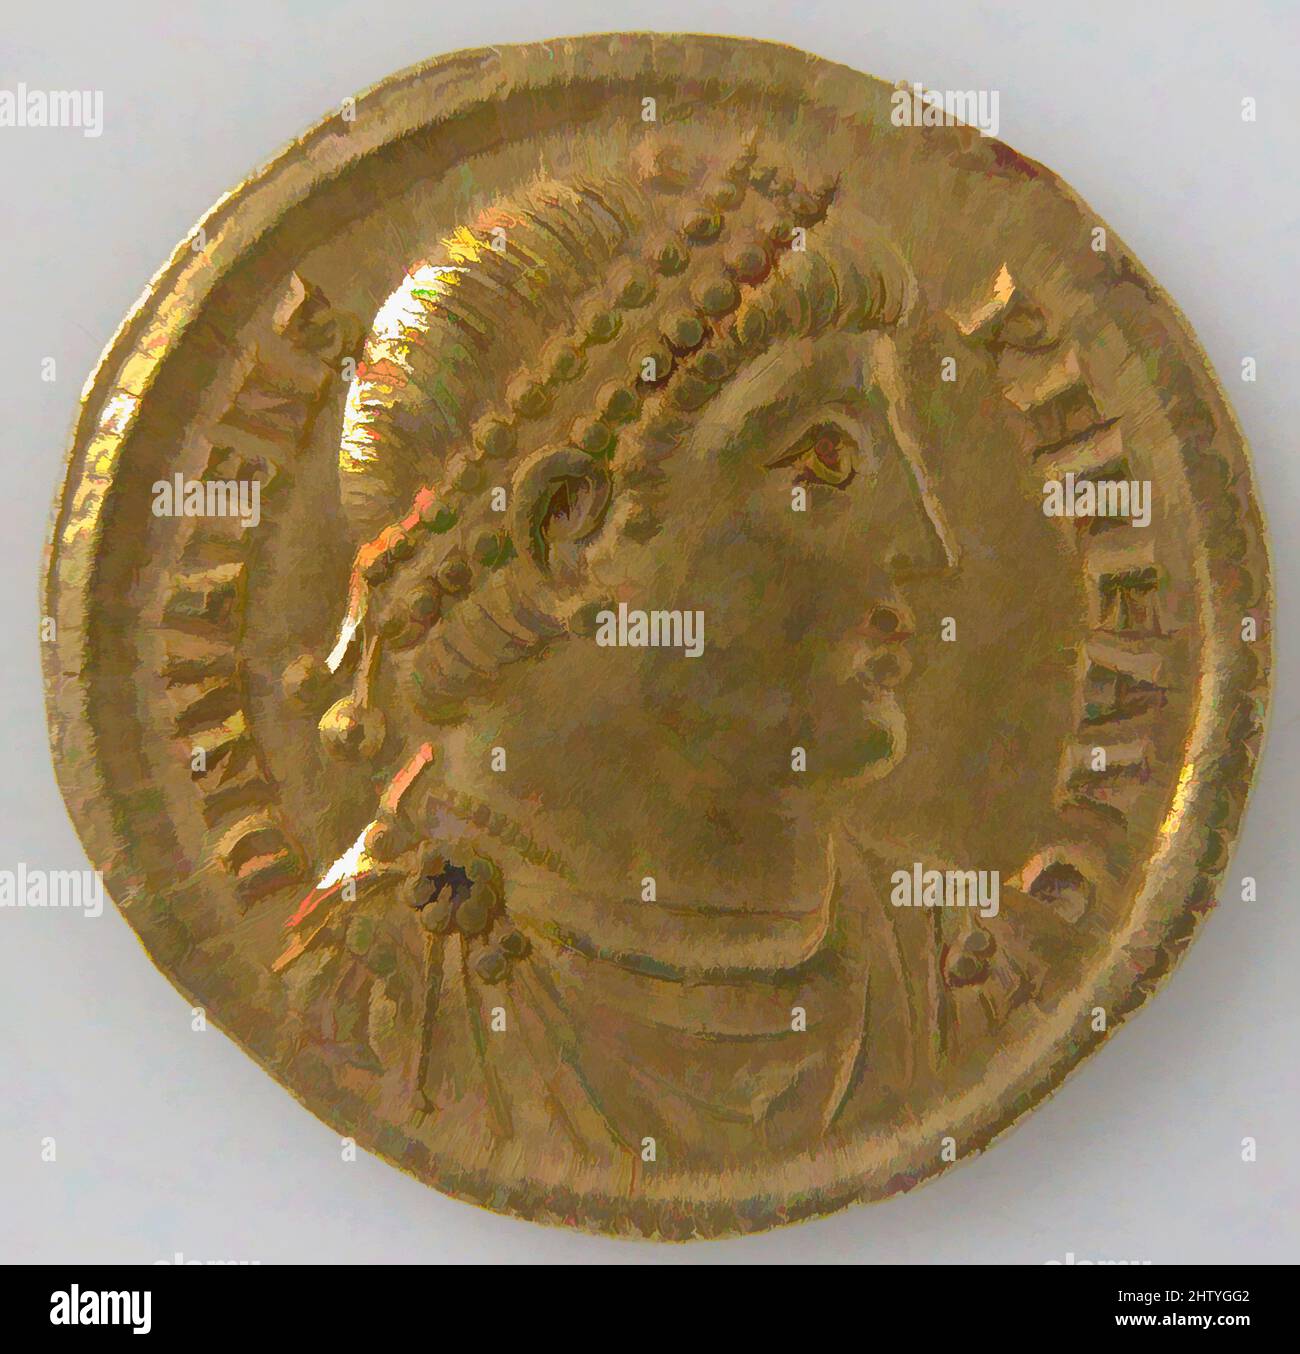 Art inspired by Solidus, 364–378, Byzantine, Gold, Overall: 13/16 x 1/16 in. (2.1 x 0.1 cm), Coins, Classic works modernized by Artotop with a splash of modernity. Shapes, color and value, eye-catching visual impact on art. Emotions through freedom of artworks in a contemporary way. A timeless message pursuing a wildly creative new direction. Artists turning to the digital medium and creating the Artotop NFT Stock Photo